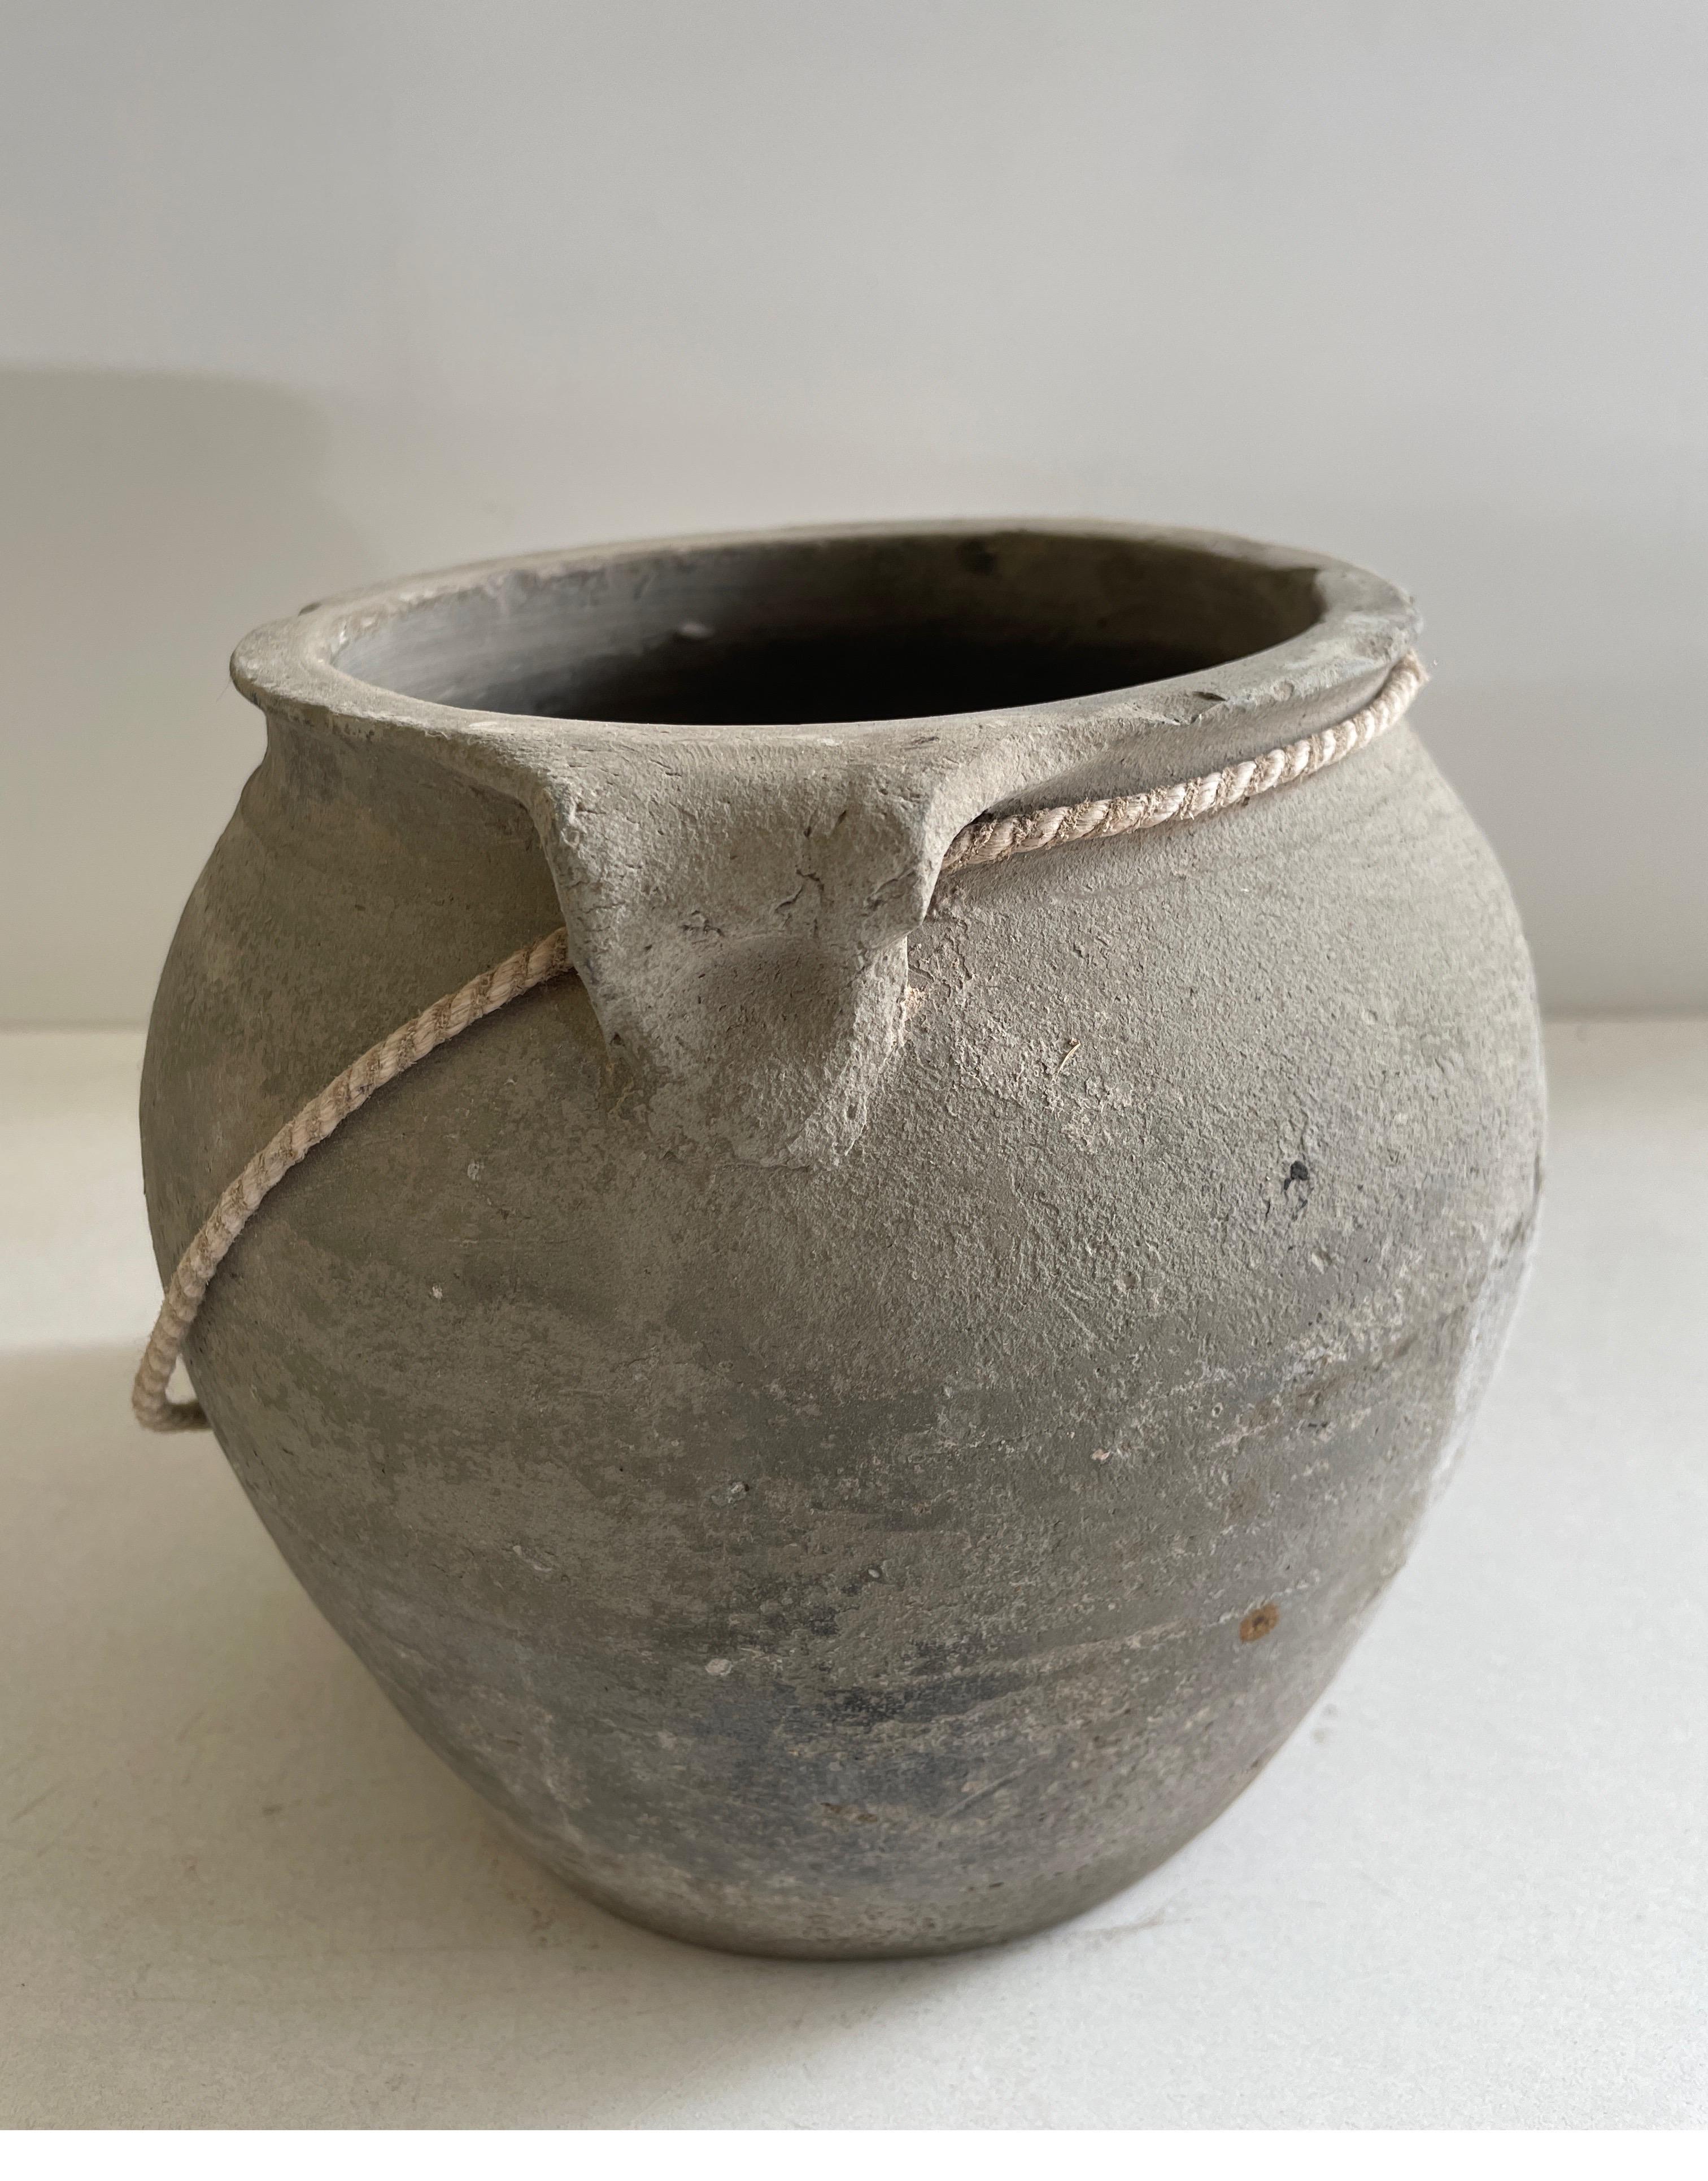 20th Century Vintage Clay Oil Pottery in Light Gray Earth Tones